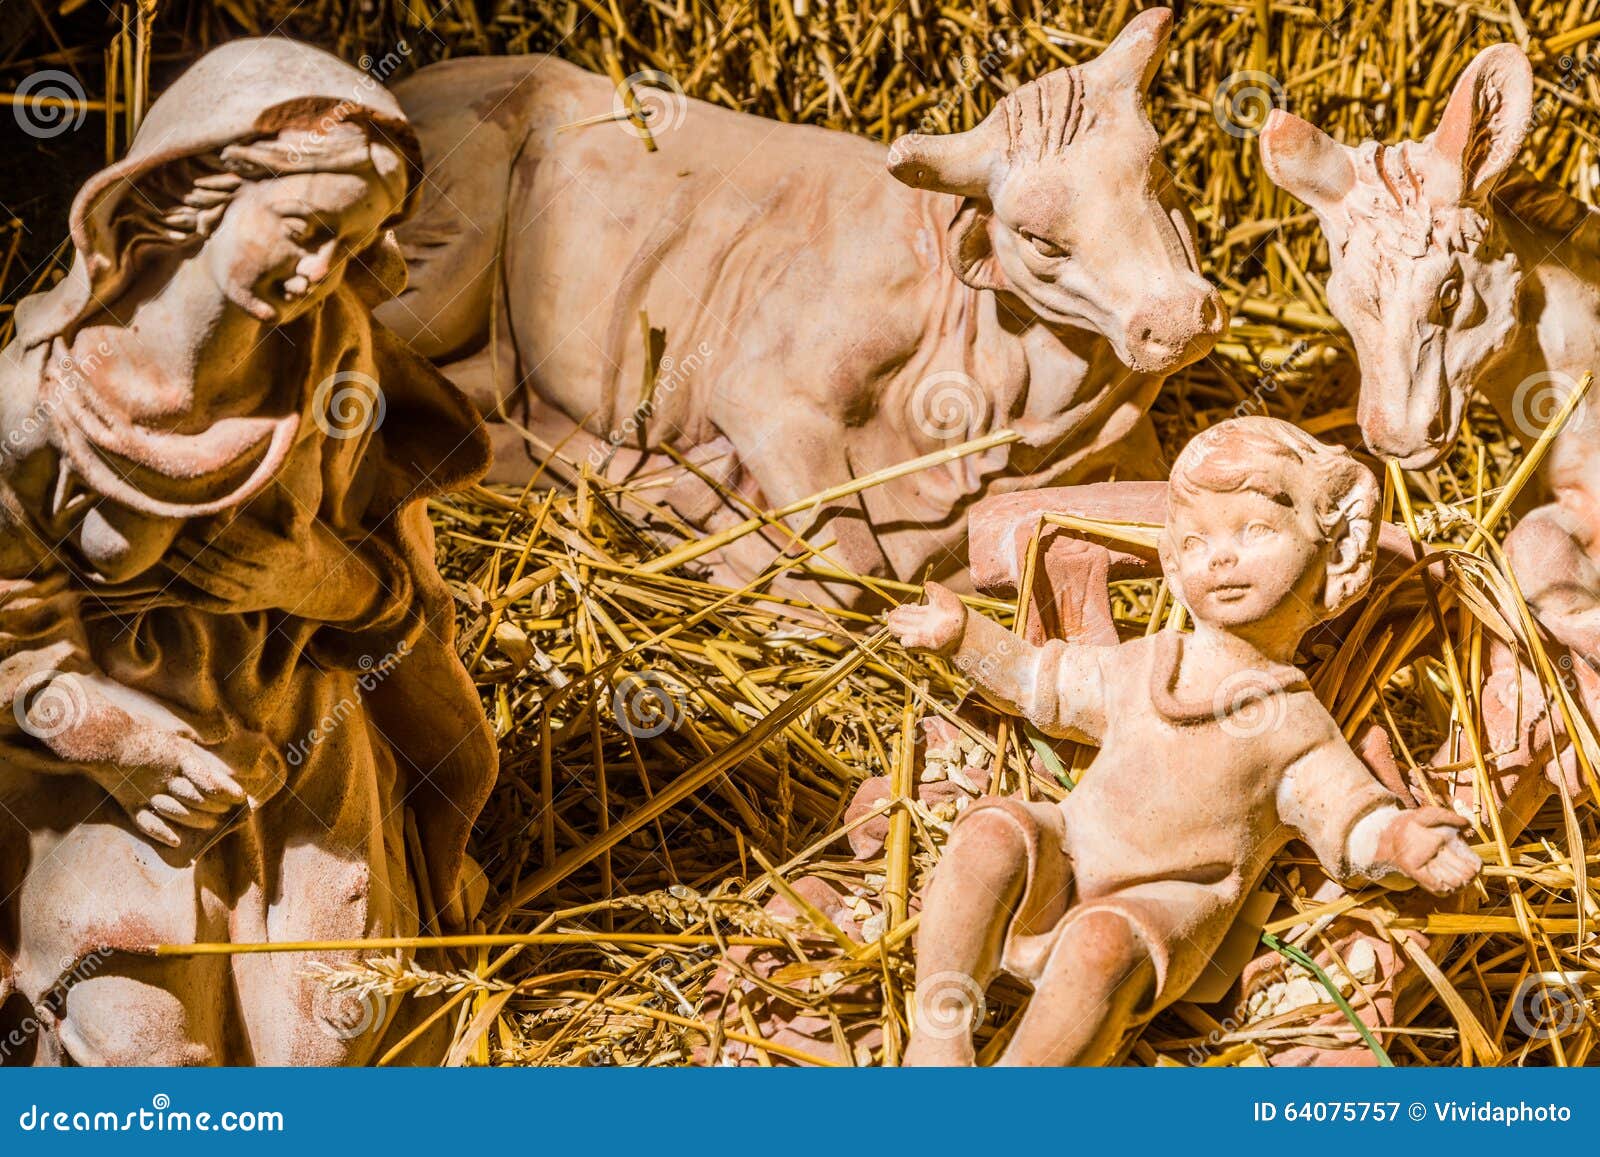 Statues in a Christmas Nativity Scene Stock Image - Image of christmas